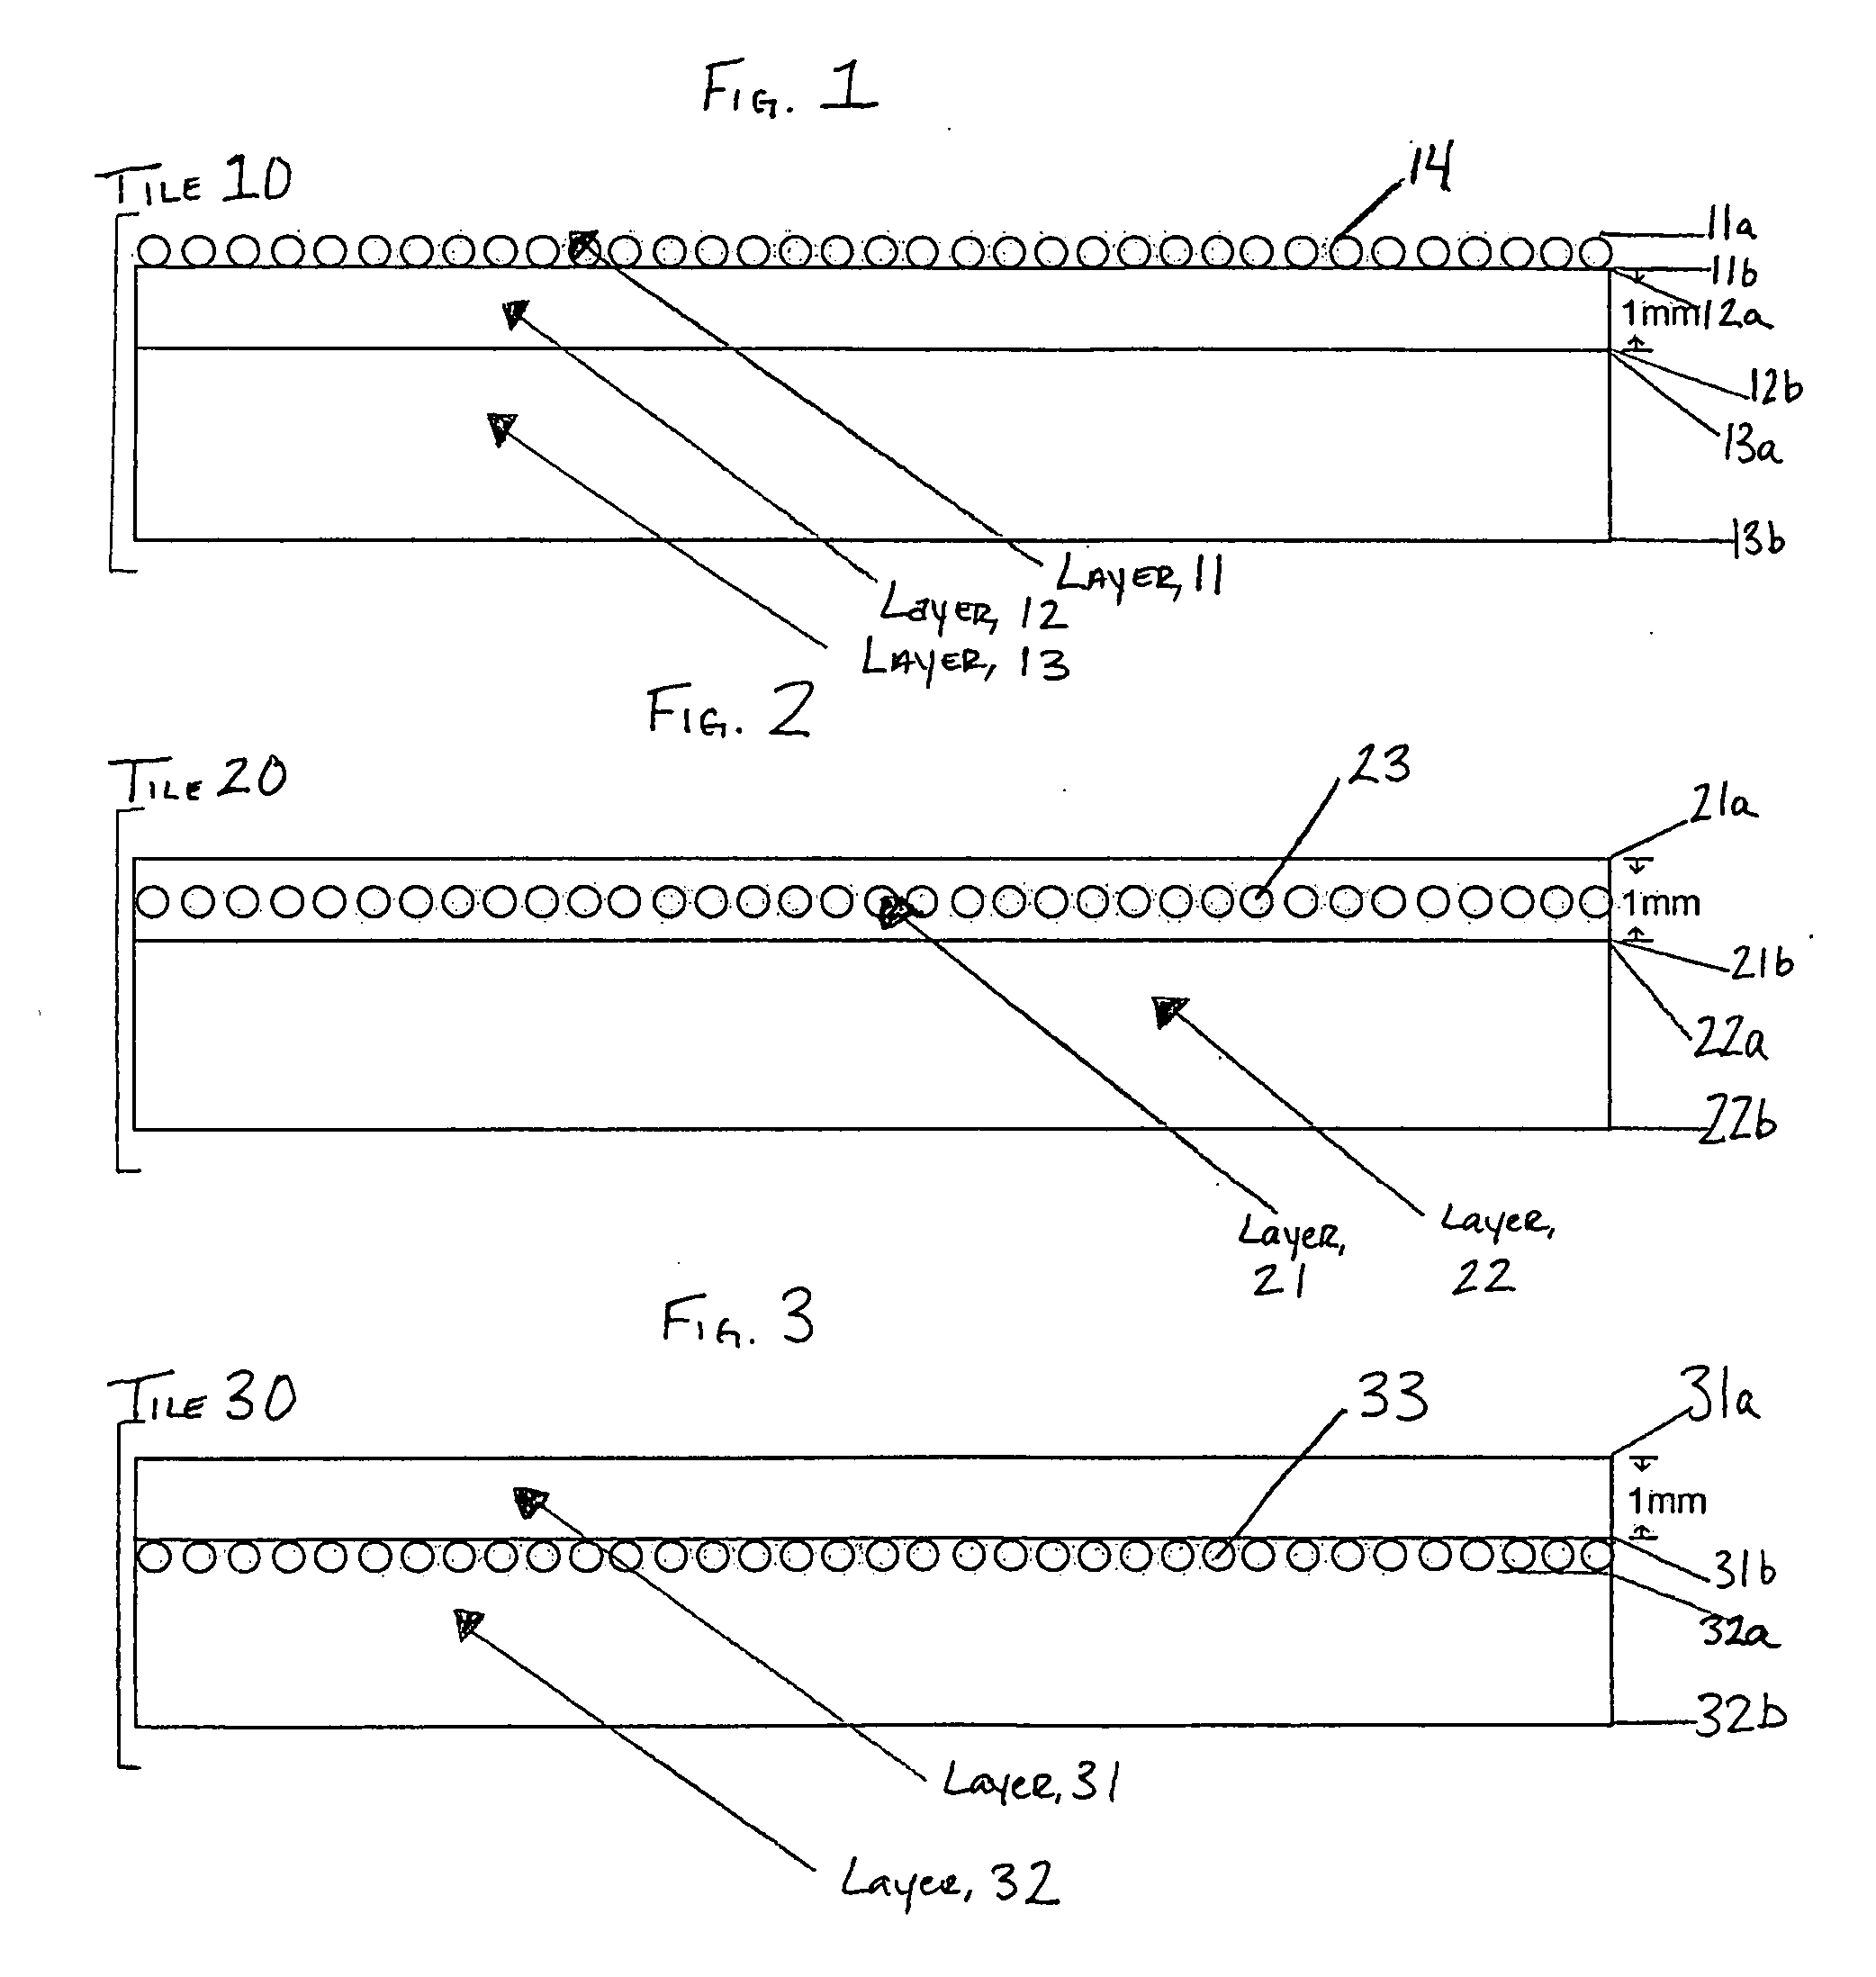 Ionic or ion-generating floor covering and method for embedding ion particles within a floor covering